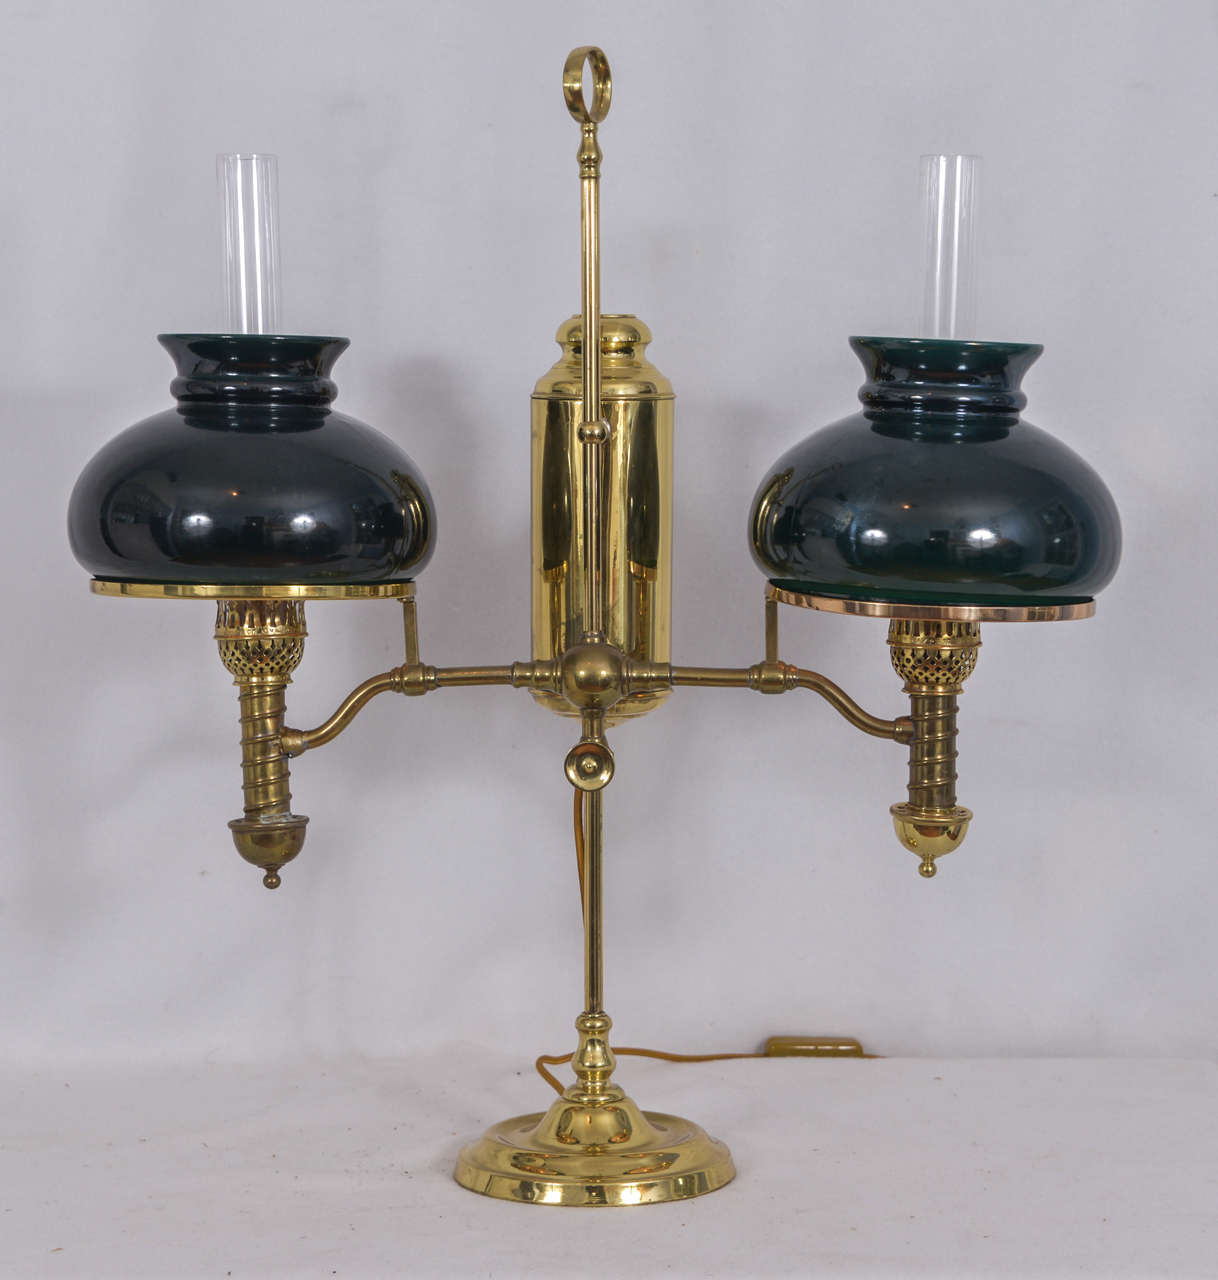 Double student lamp, originally oil, electrified. 1900s oil lamp with original green, cased glass lamp shades, new chimneys.